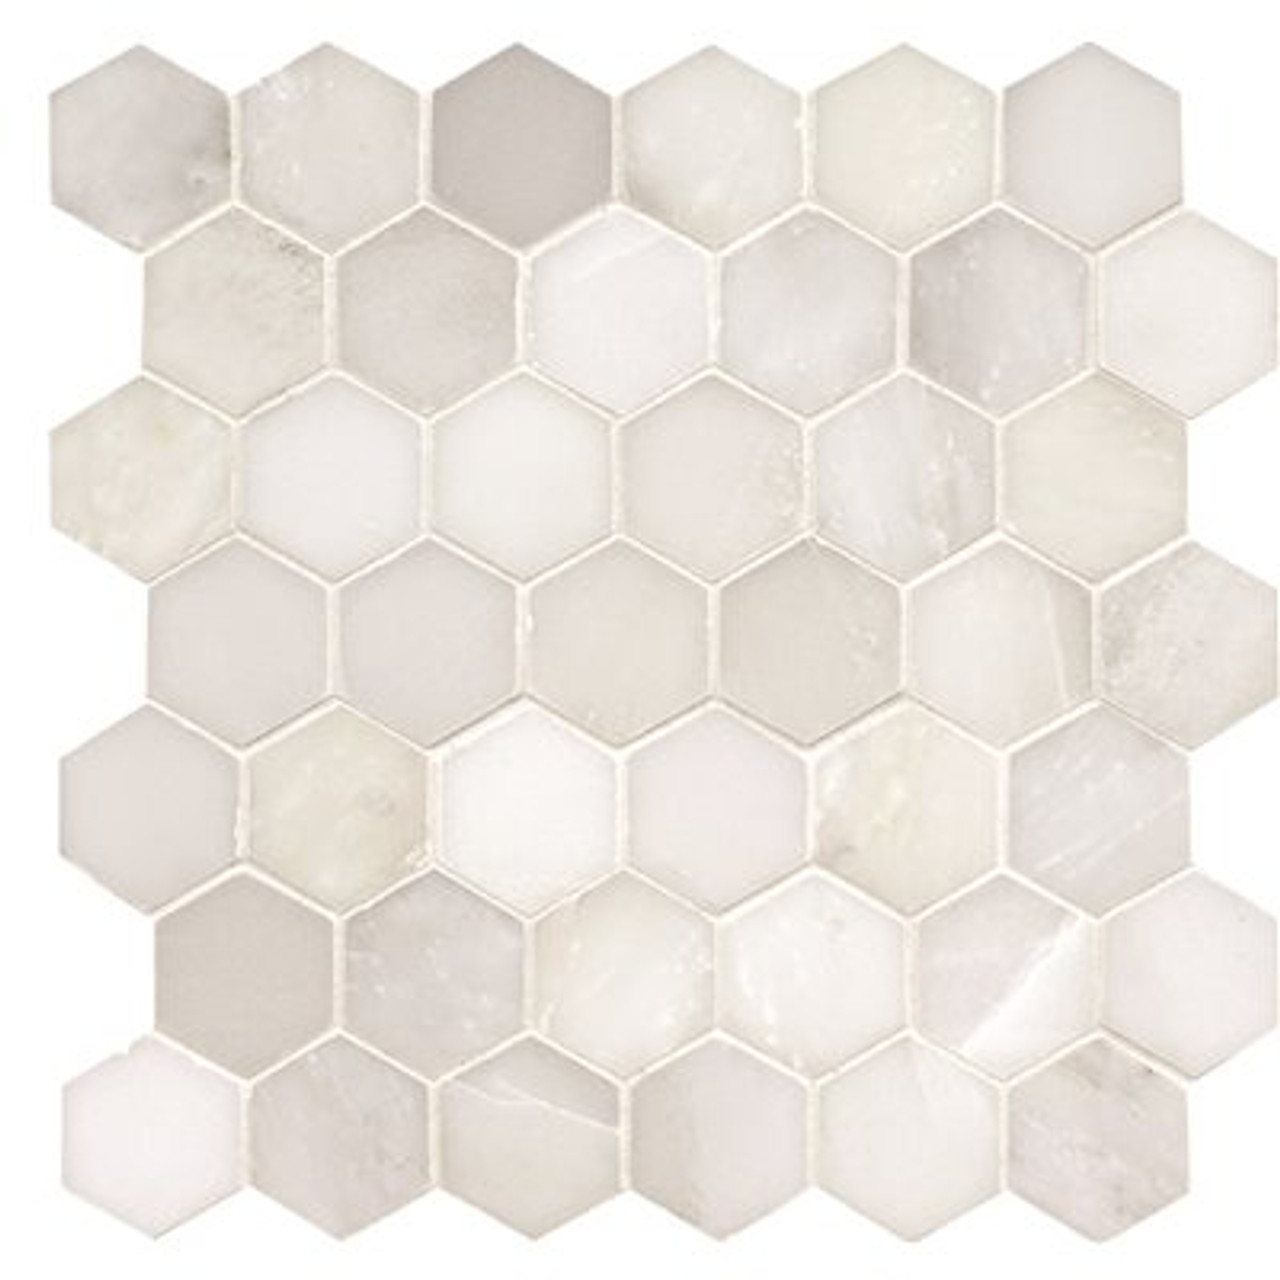 Msi Greecian White Hexagon 12 In. X 11.75 In. X 10 Mm Polished Marble Mosaic Tile (9.8 Sq. Ft. / Case)